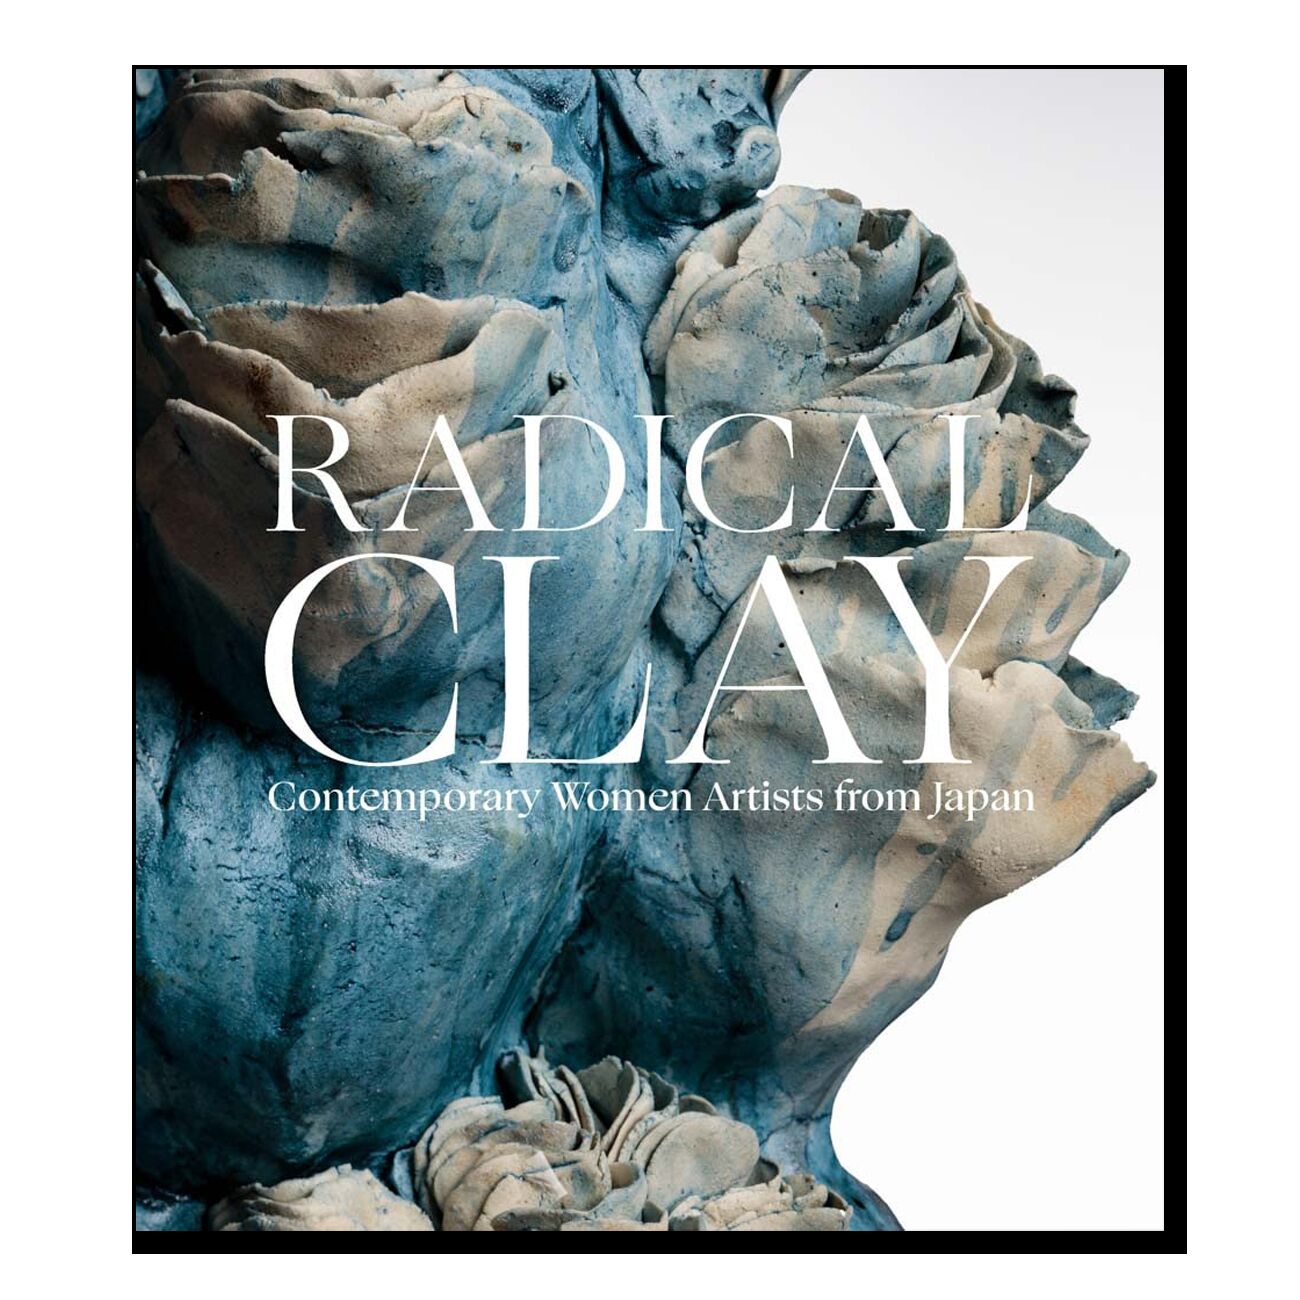 Radical Clay: Contemporary Women Artists from Japan